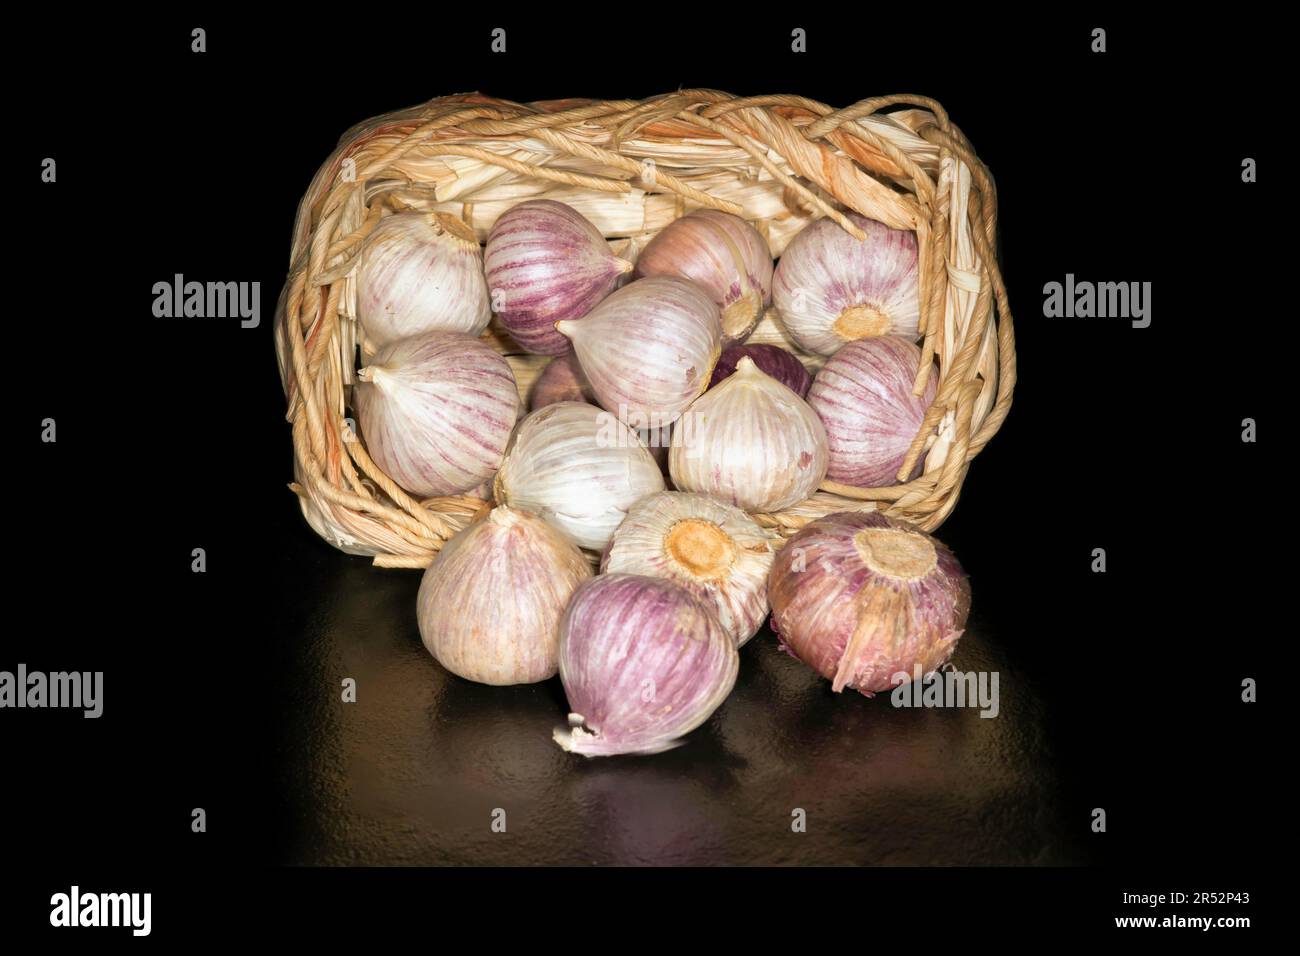 Tubers of alpine broad-leaf allium (Allium victorialis) in a woven basket, food photography with black background Stock Photo